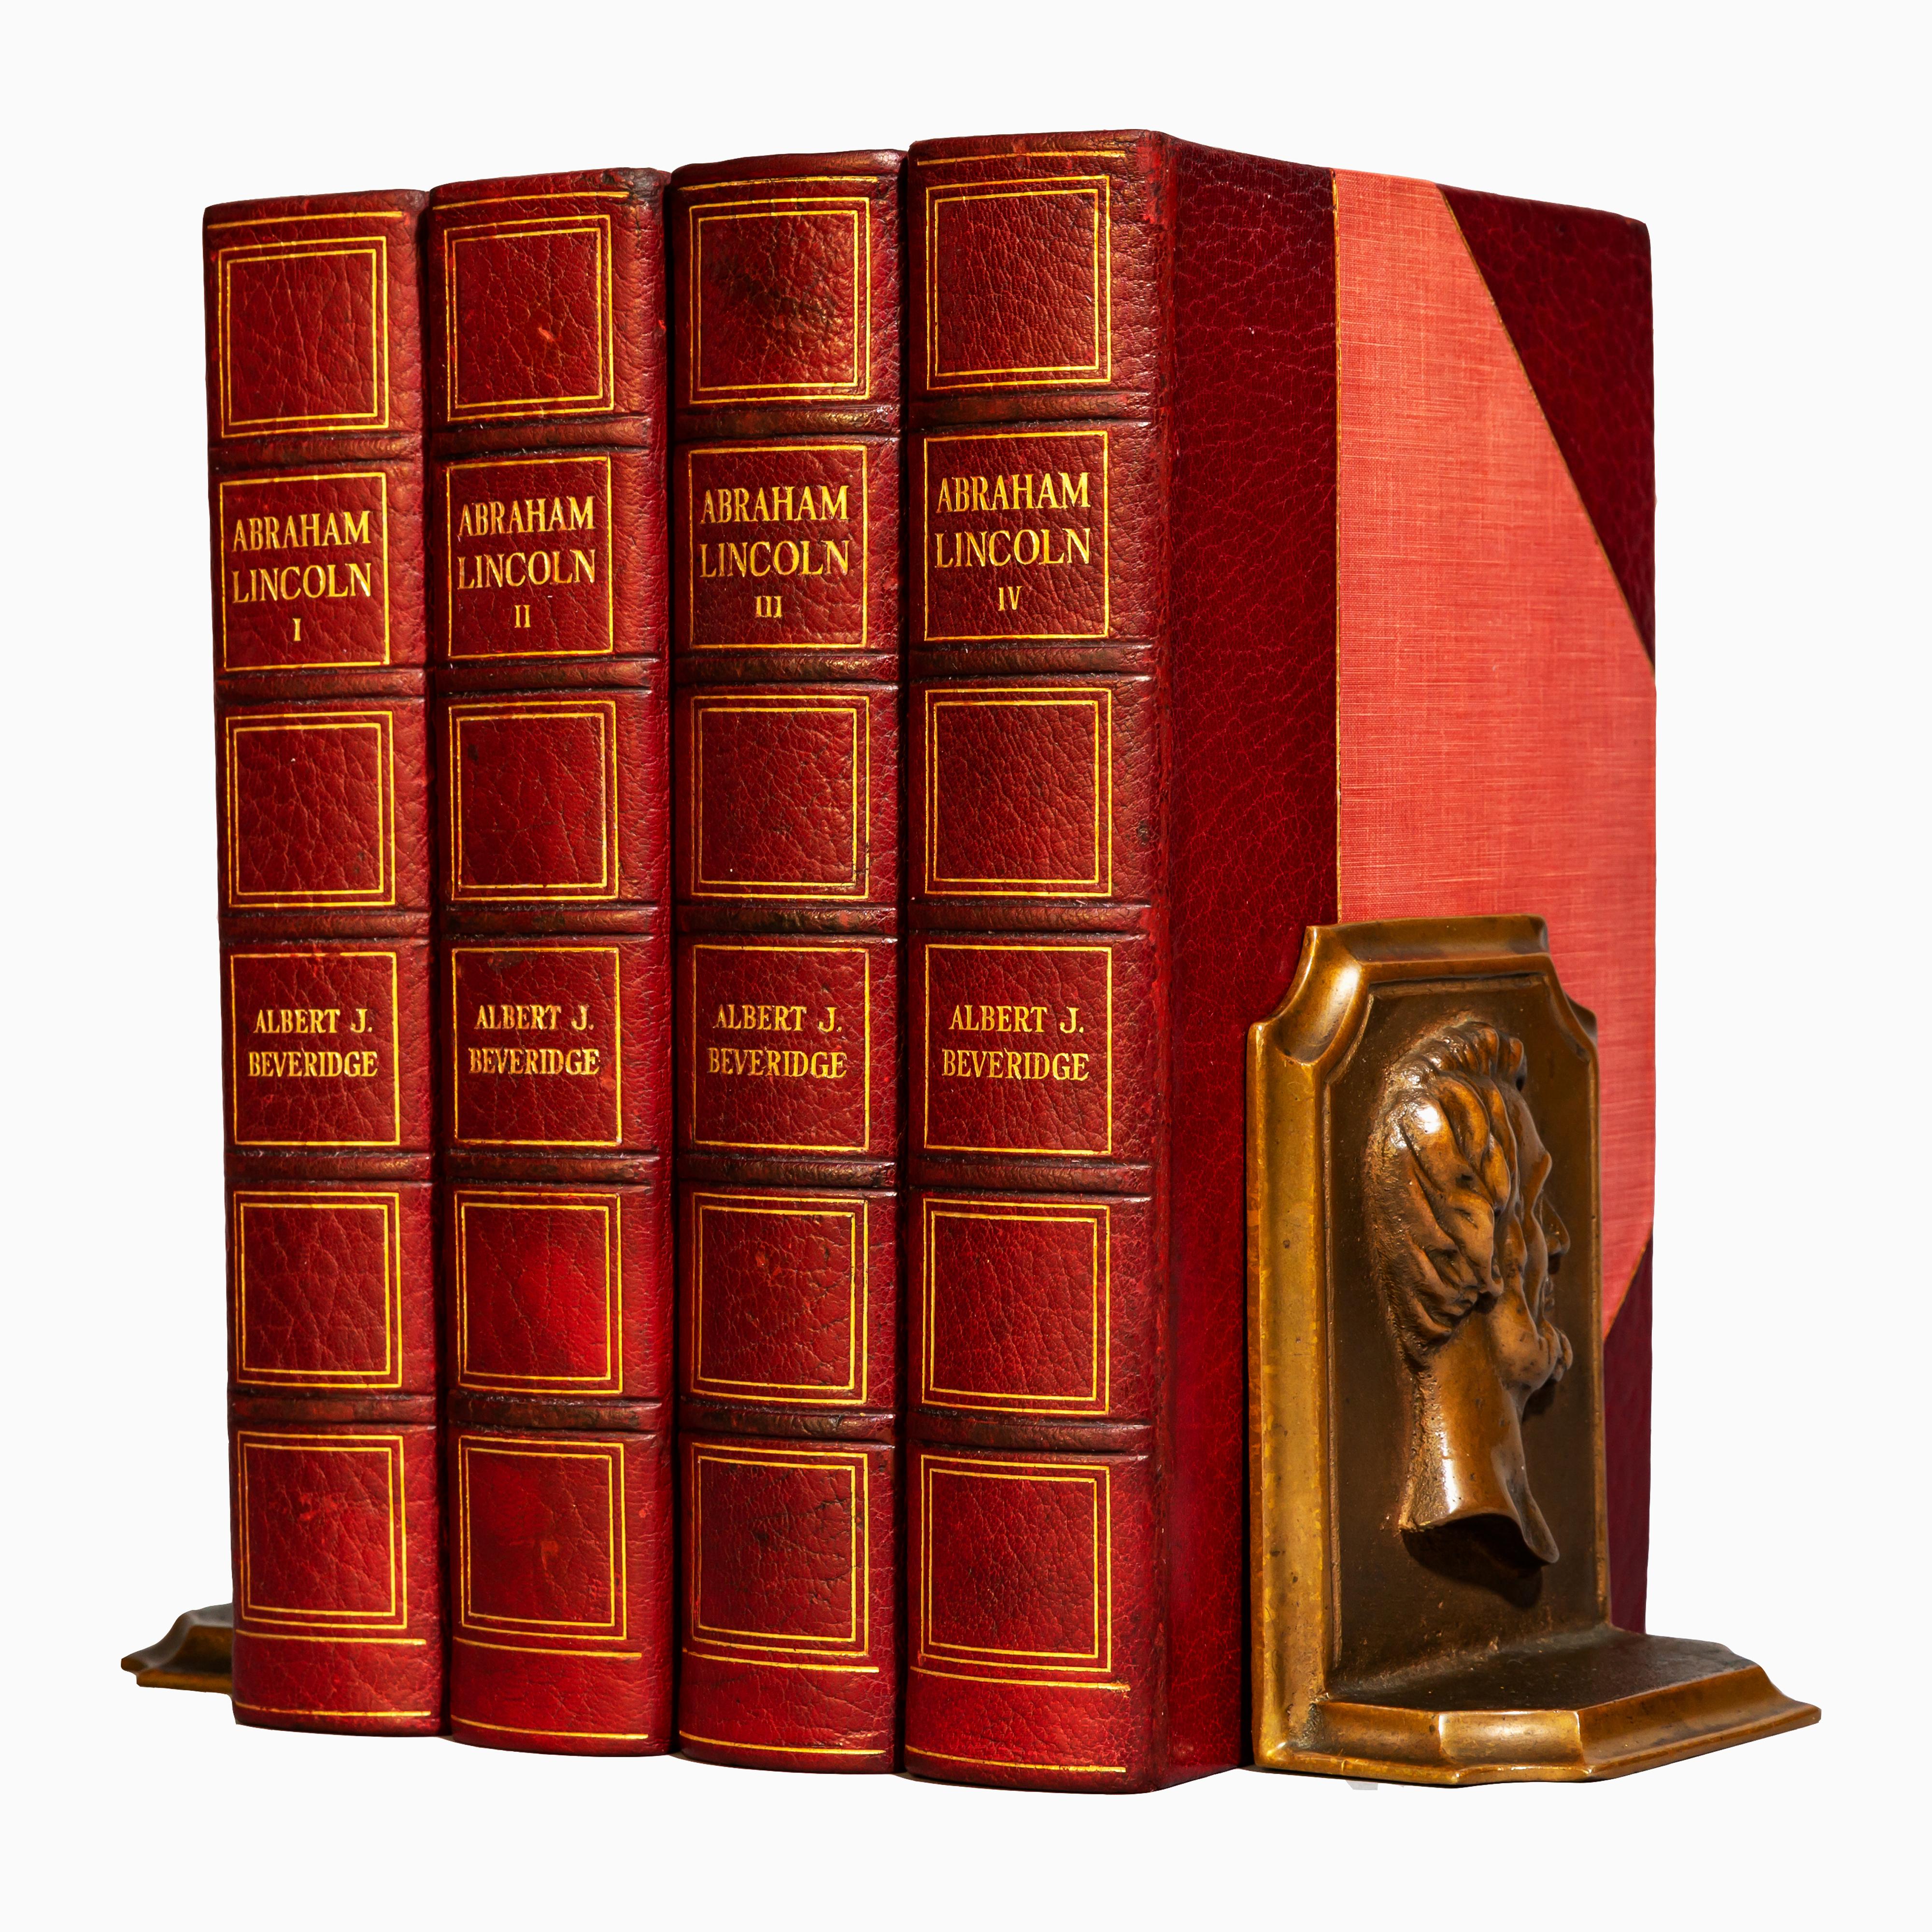 4 volumes.

Abraham Lincoln (1809-1858) with illustrations.
“Manuscript Edition”. Volumes one with a manuscript by Beveridge. Bound in 3/4 red Morocco, cloth boards, top edges gilt, raised bands, gilt panels. 

Published: Boston & New York: